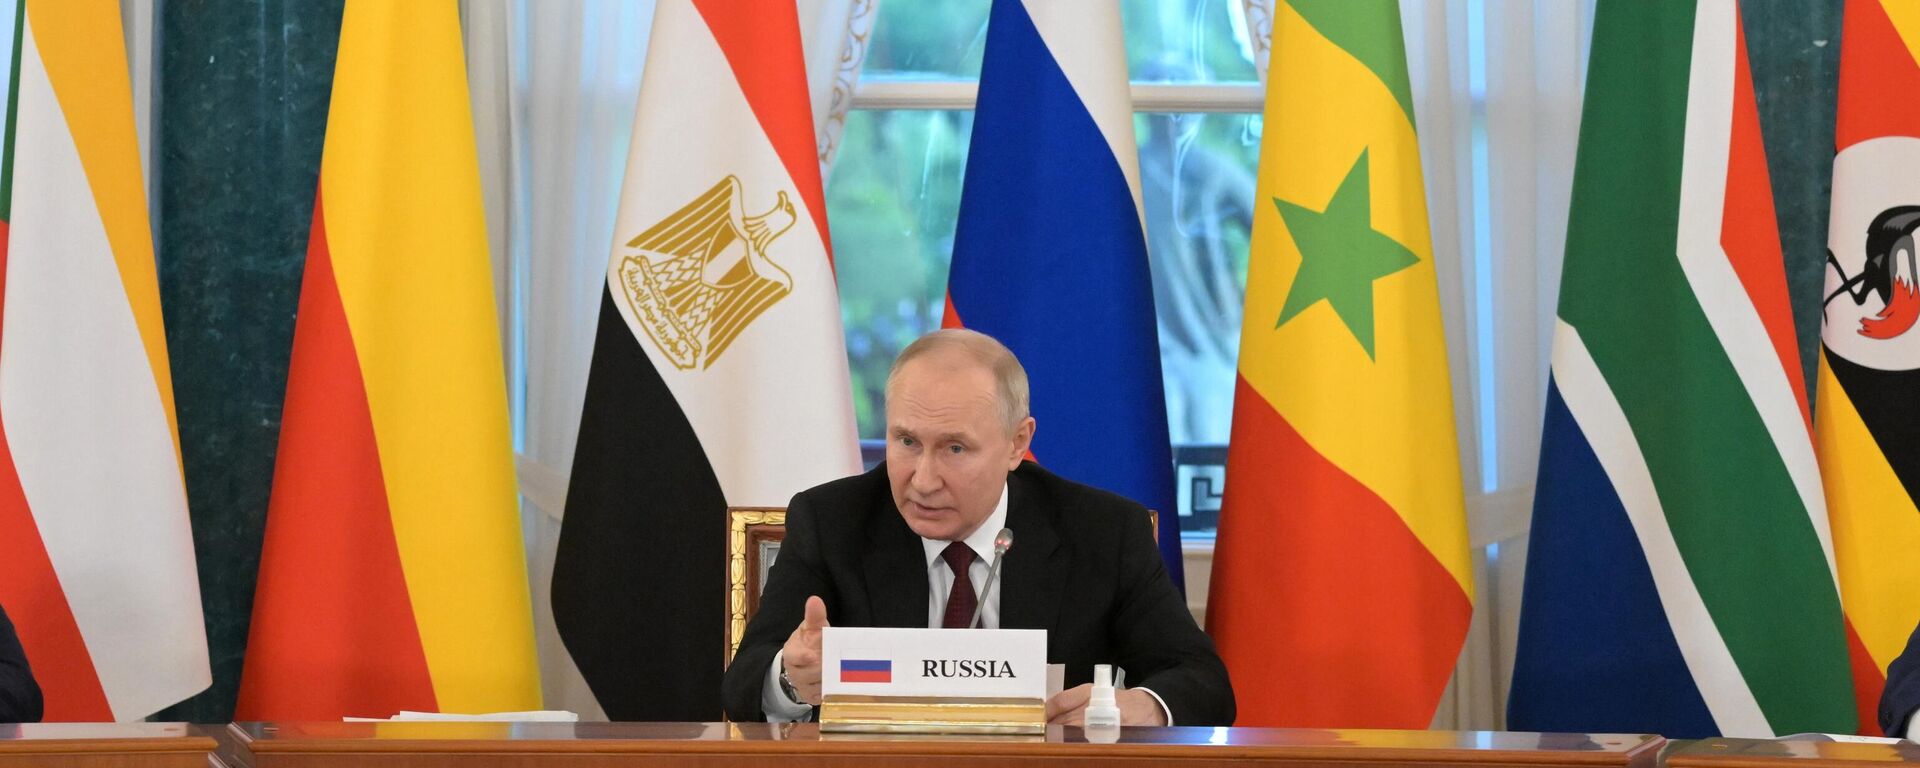 Russian President Vladimir Putin at the meeting with the leaders of a number of African states who arrived in St. Petersburg to negotiate possible ways to resolve the conflict in Ukraine, on June 17, 2023.  - Sputnik Africa, 1920, 17.06.2023